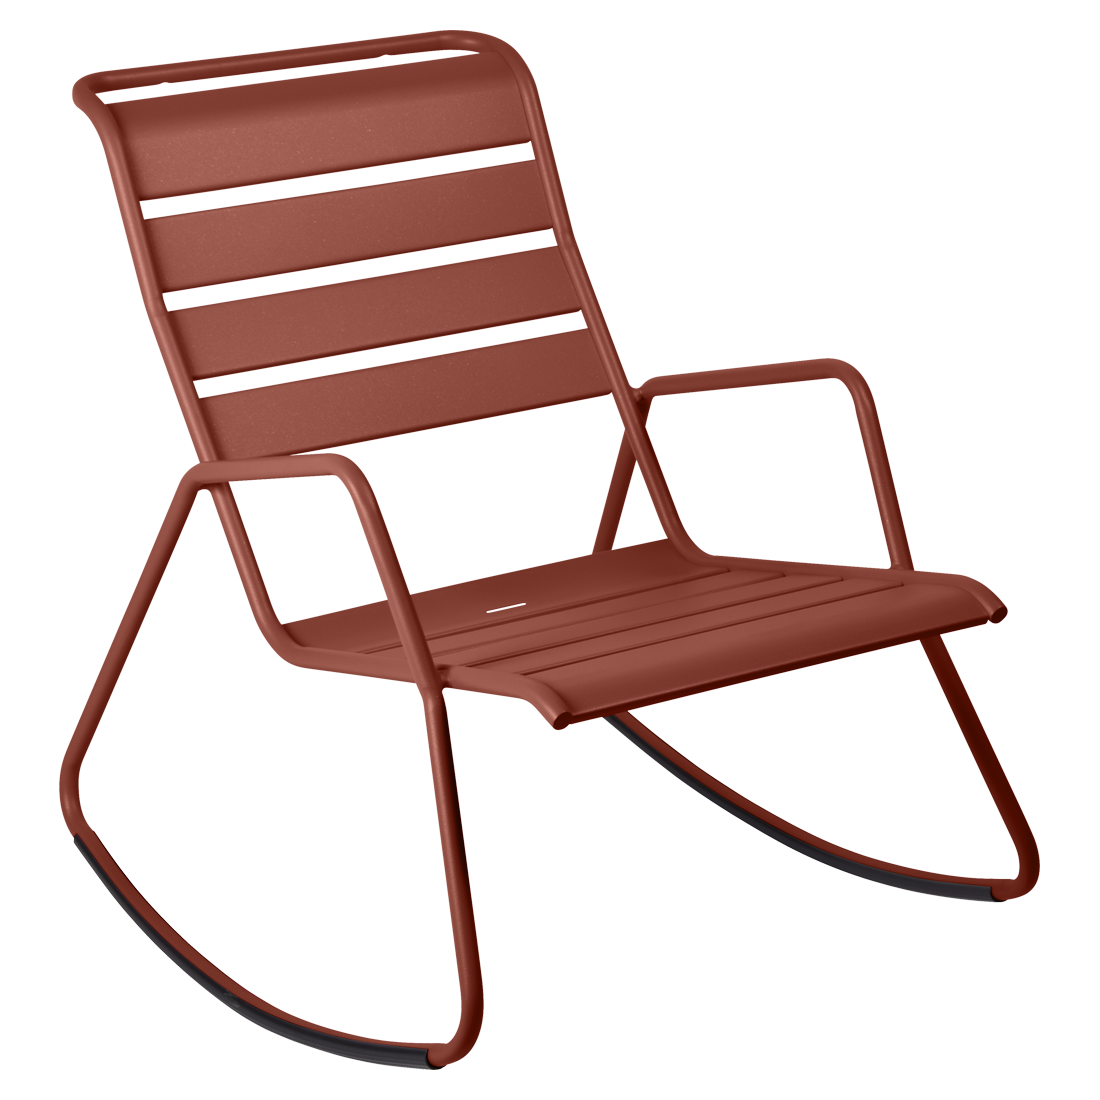 Rocking chair monceau ocre rouge